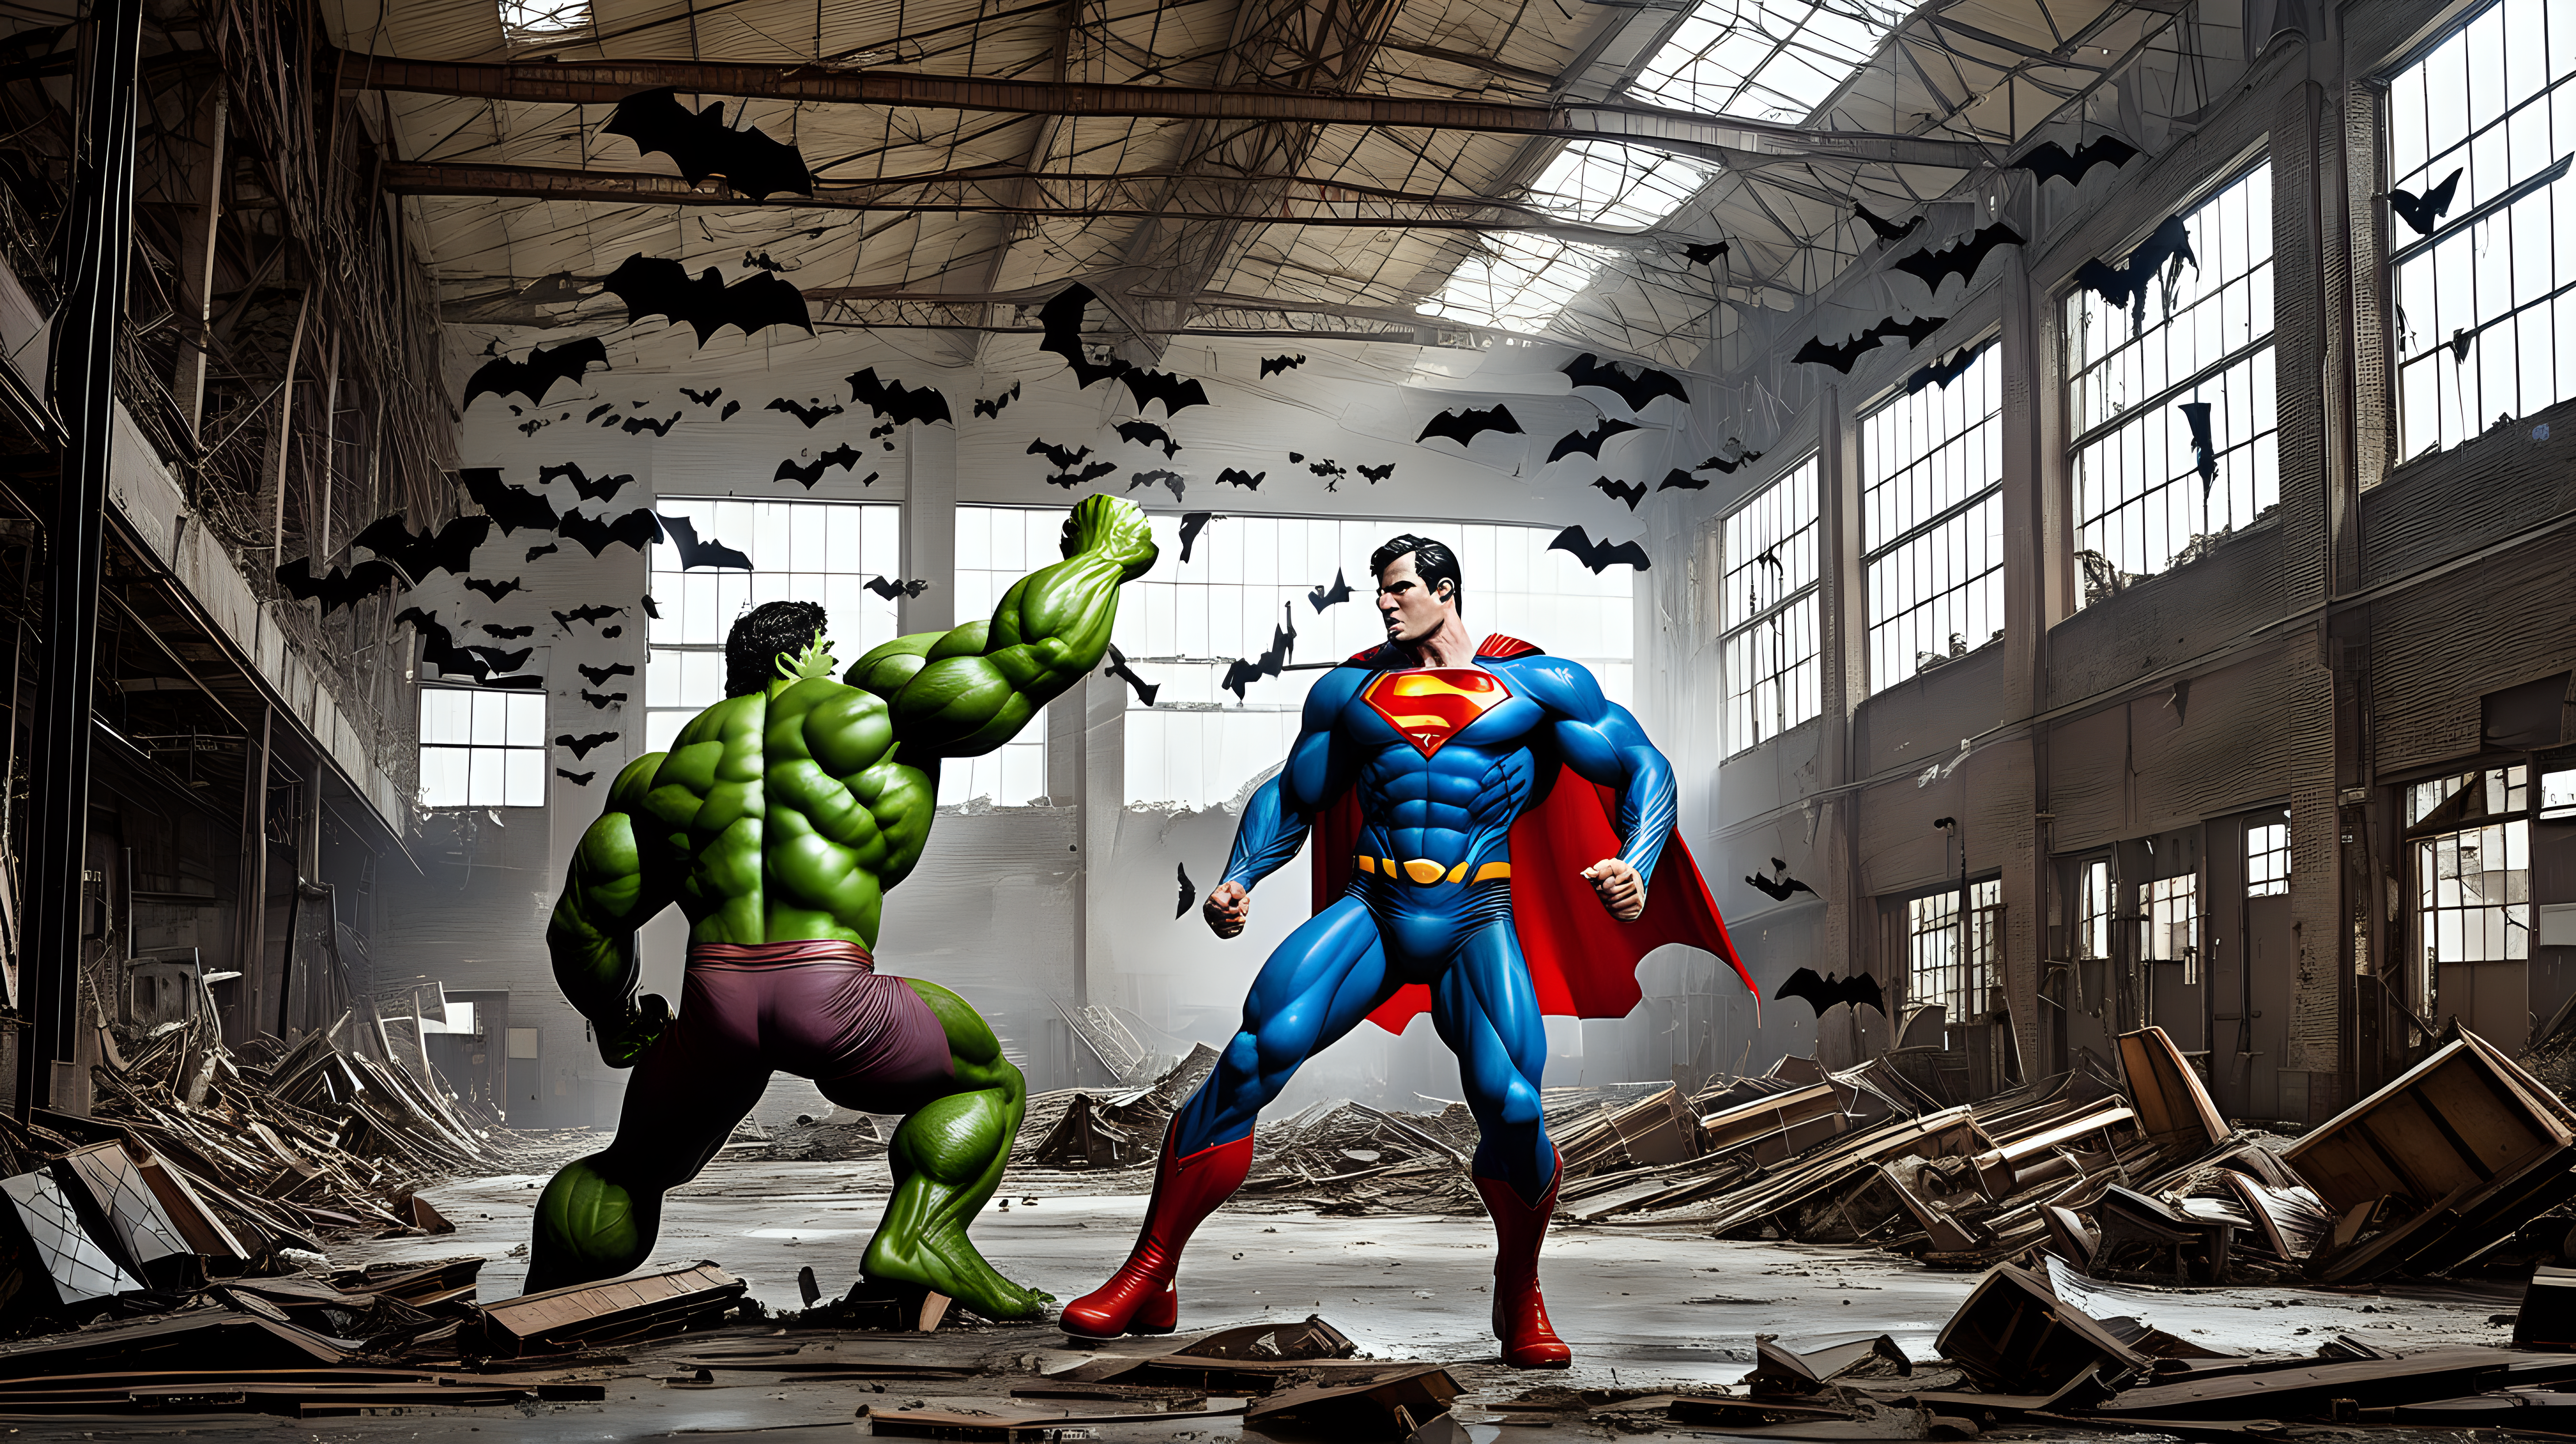 Superman fights the hulk in an abandoned guitar